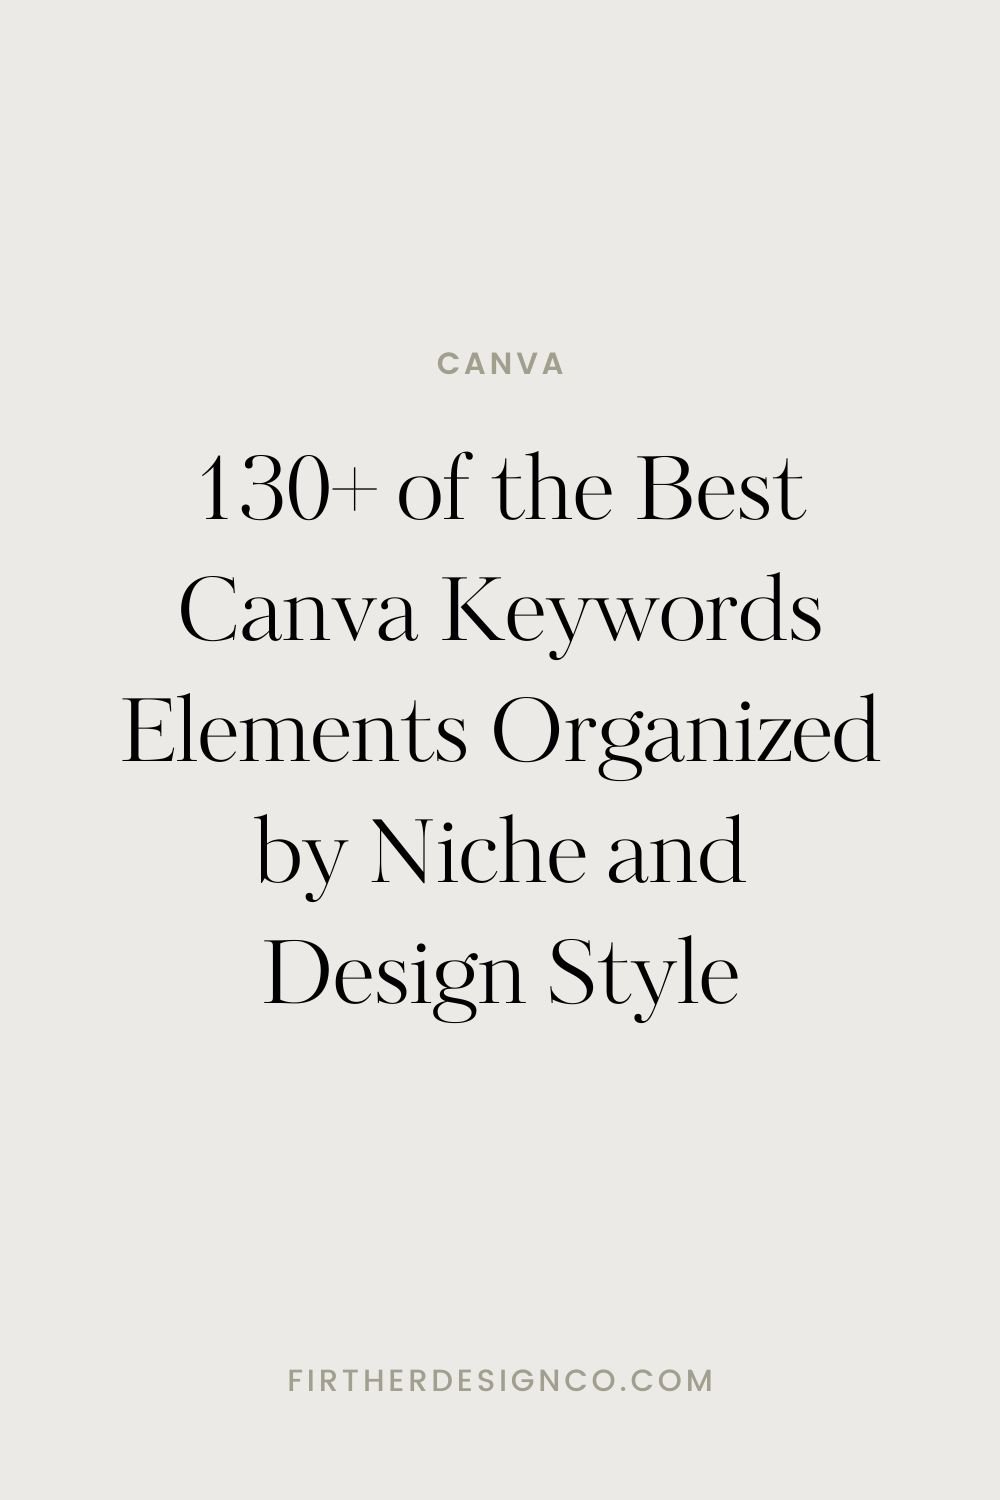 130+ of the Best Canva Keywords Elements Organized by Niche and